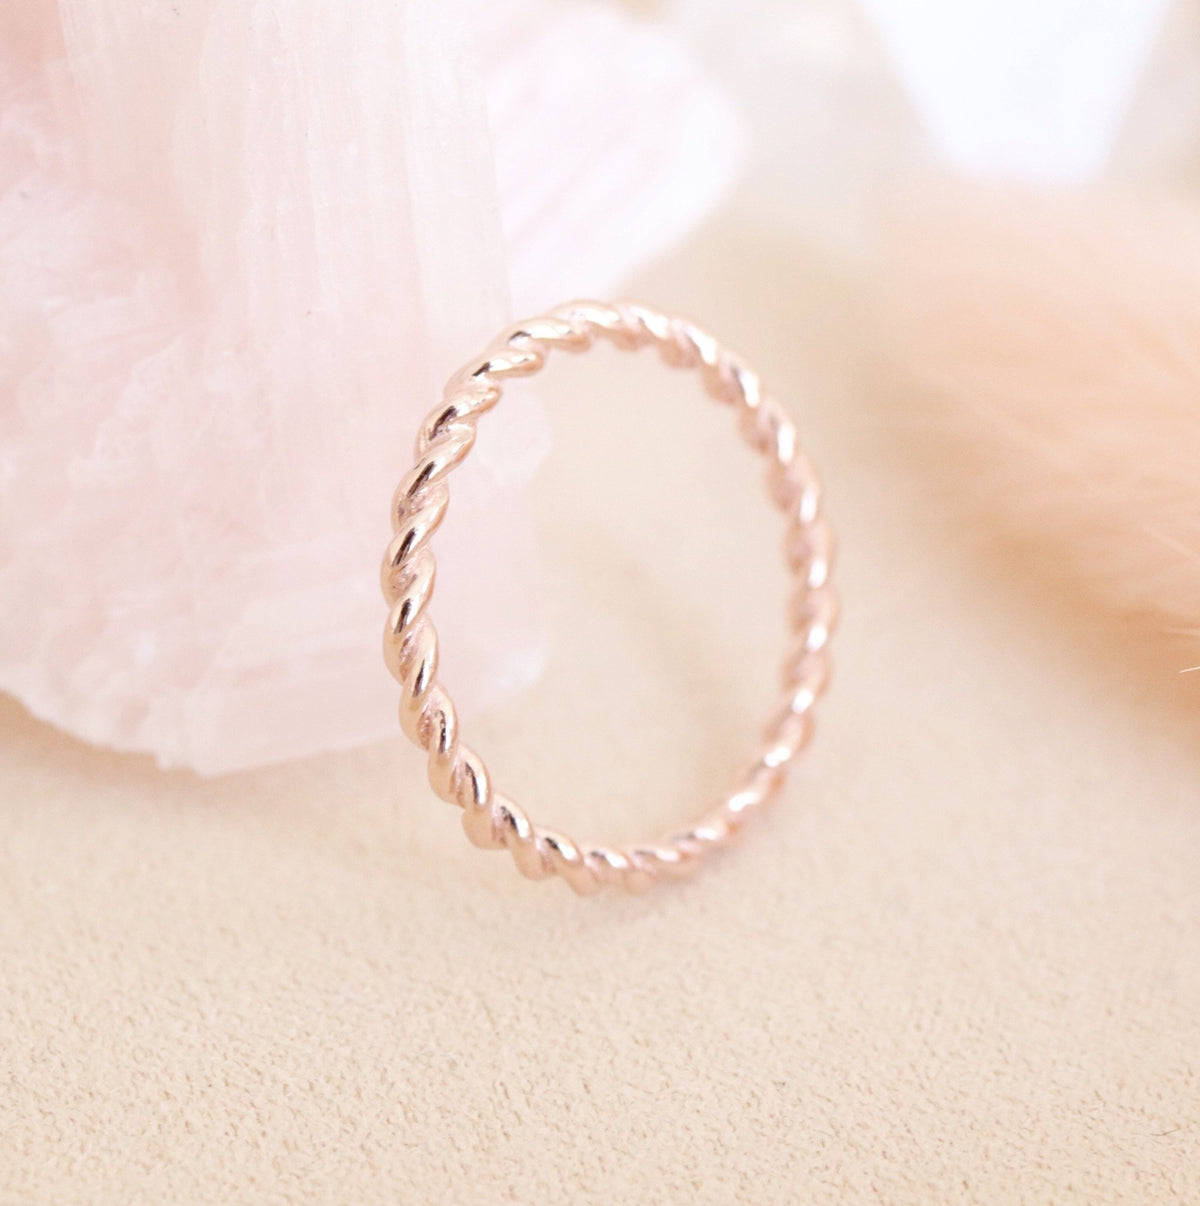 POISE THIN CABLE LINK BAND RING - ROSE GOLD - SO PRETTY CARA COTTER